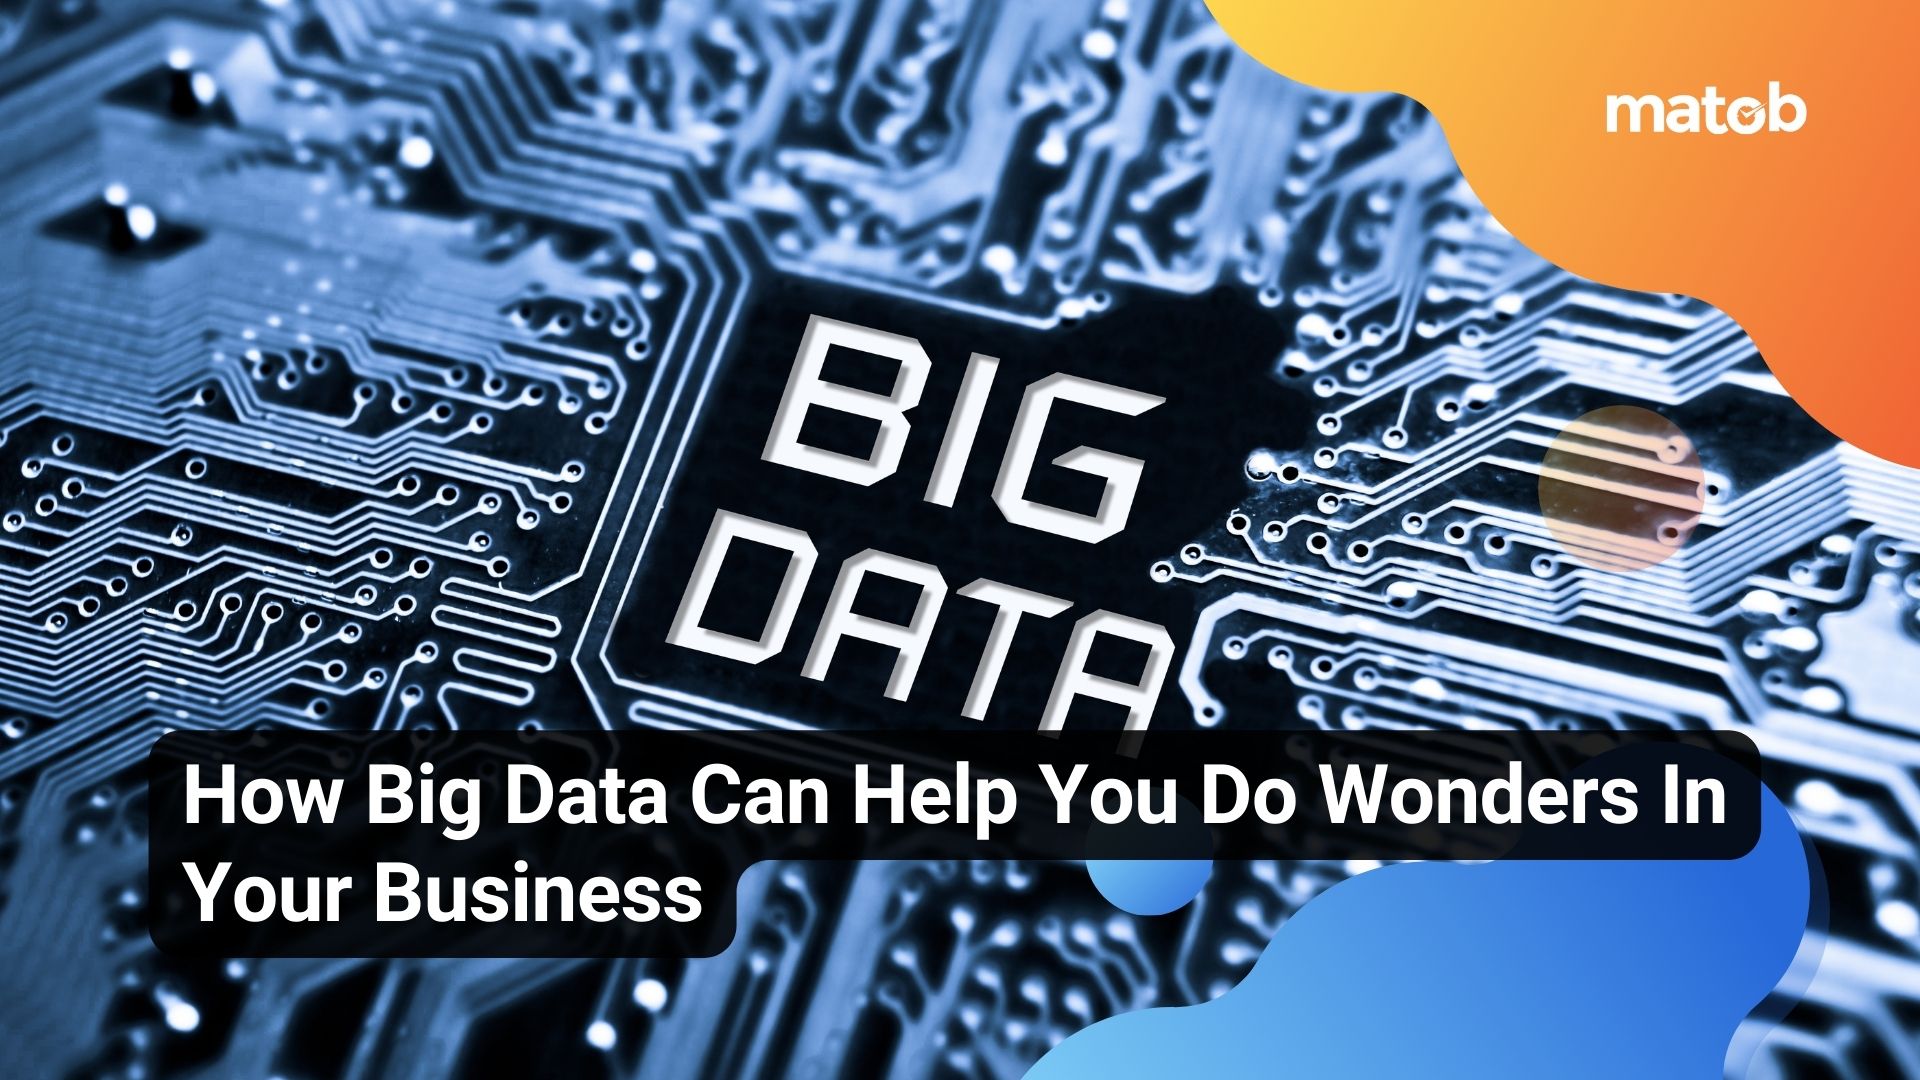 How Big Data Can Help You Do Wonders In Your Business